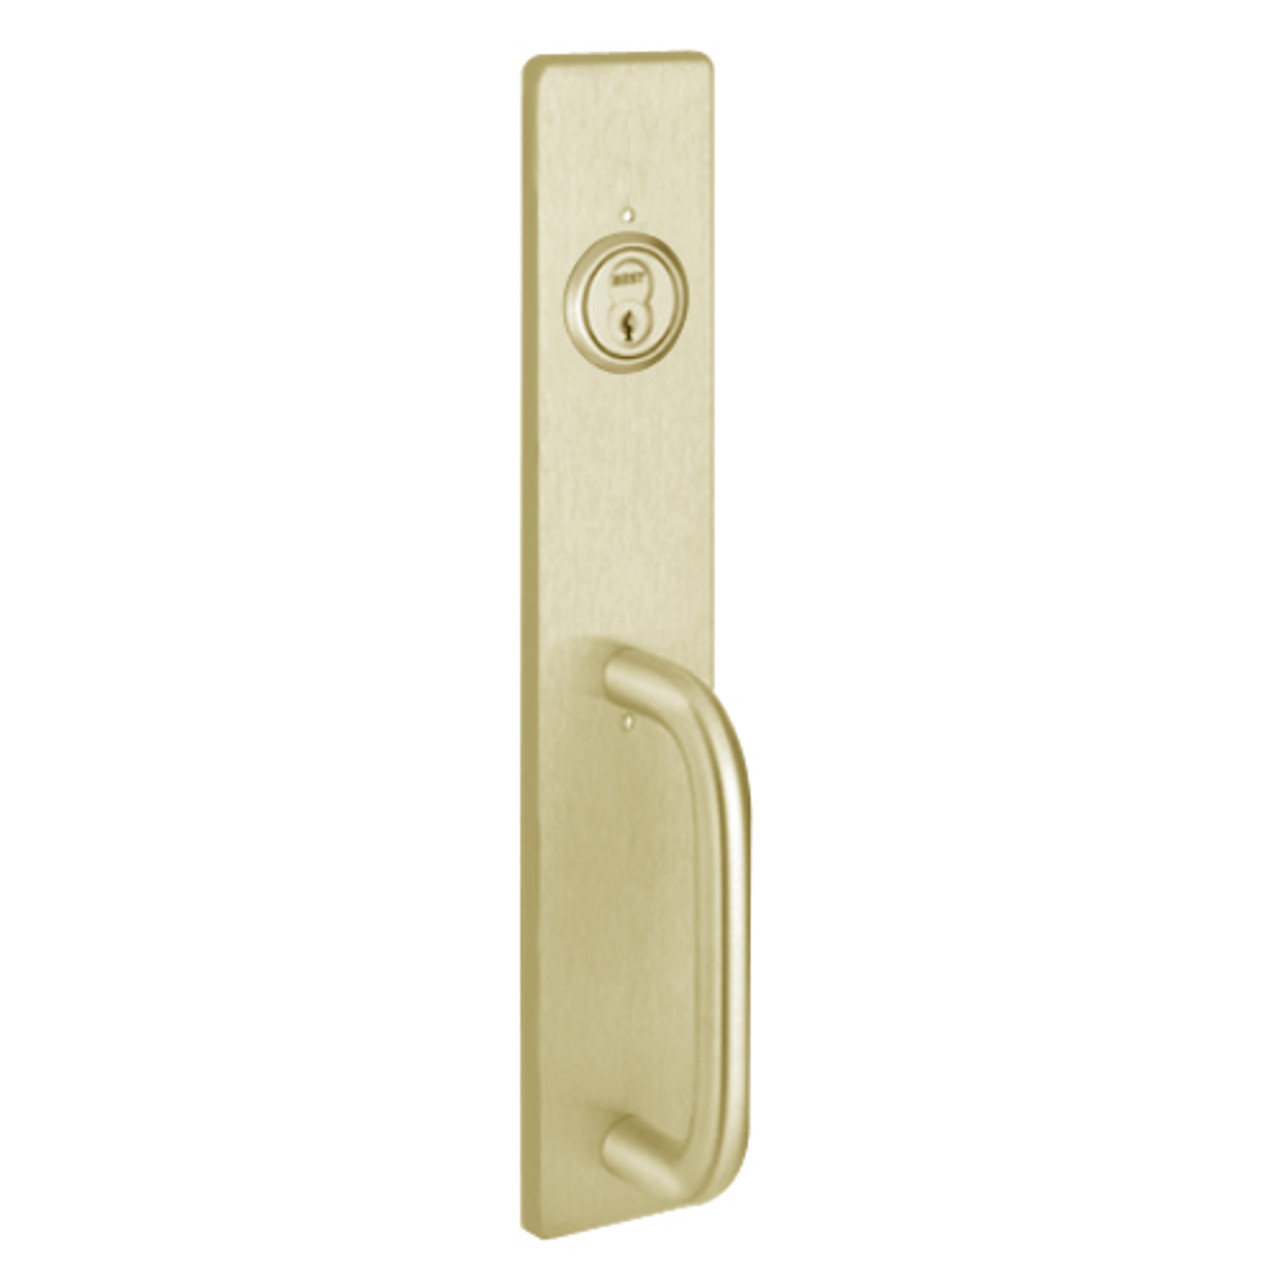 1703C-606 PHI Key Retracts Latchbolt with C Design Pull for Apex and Olympian Series Exit Device in Satin Brass Finish